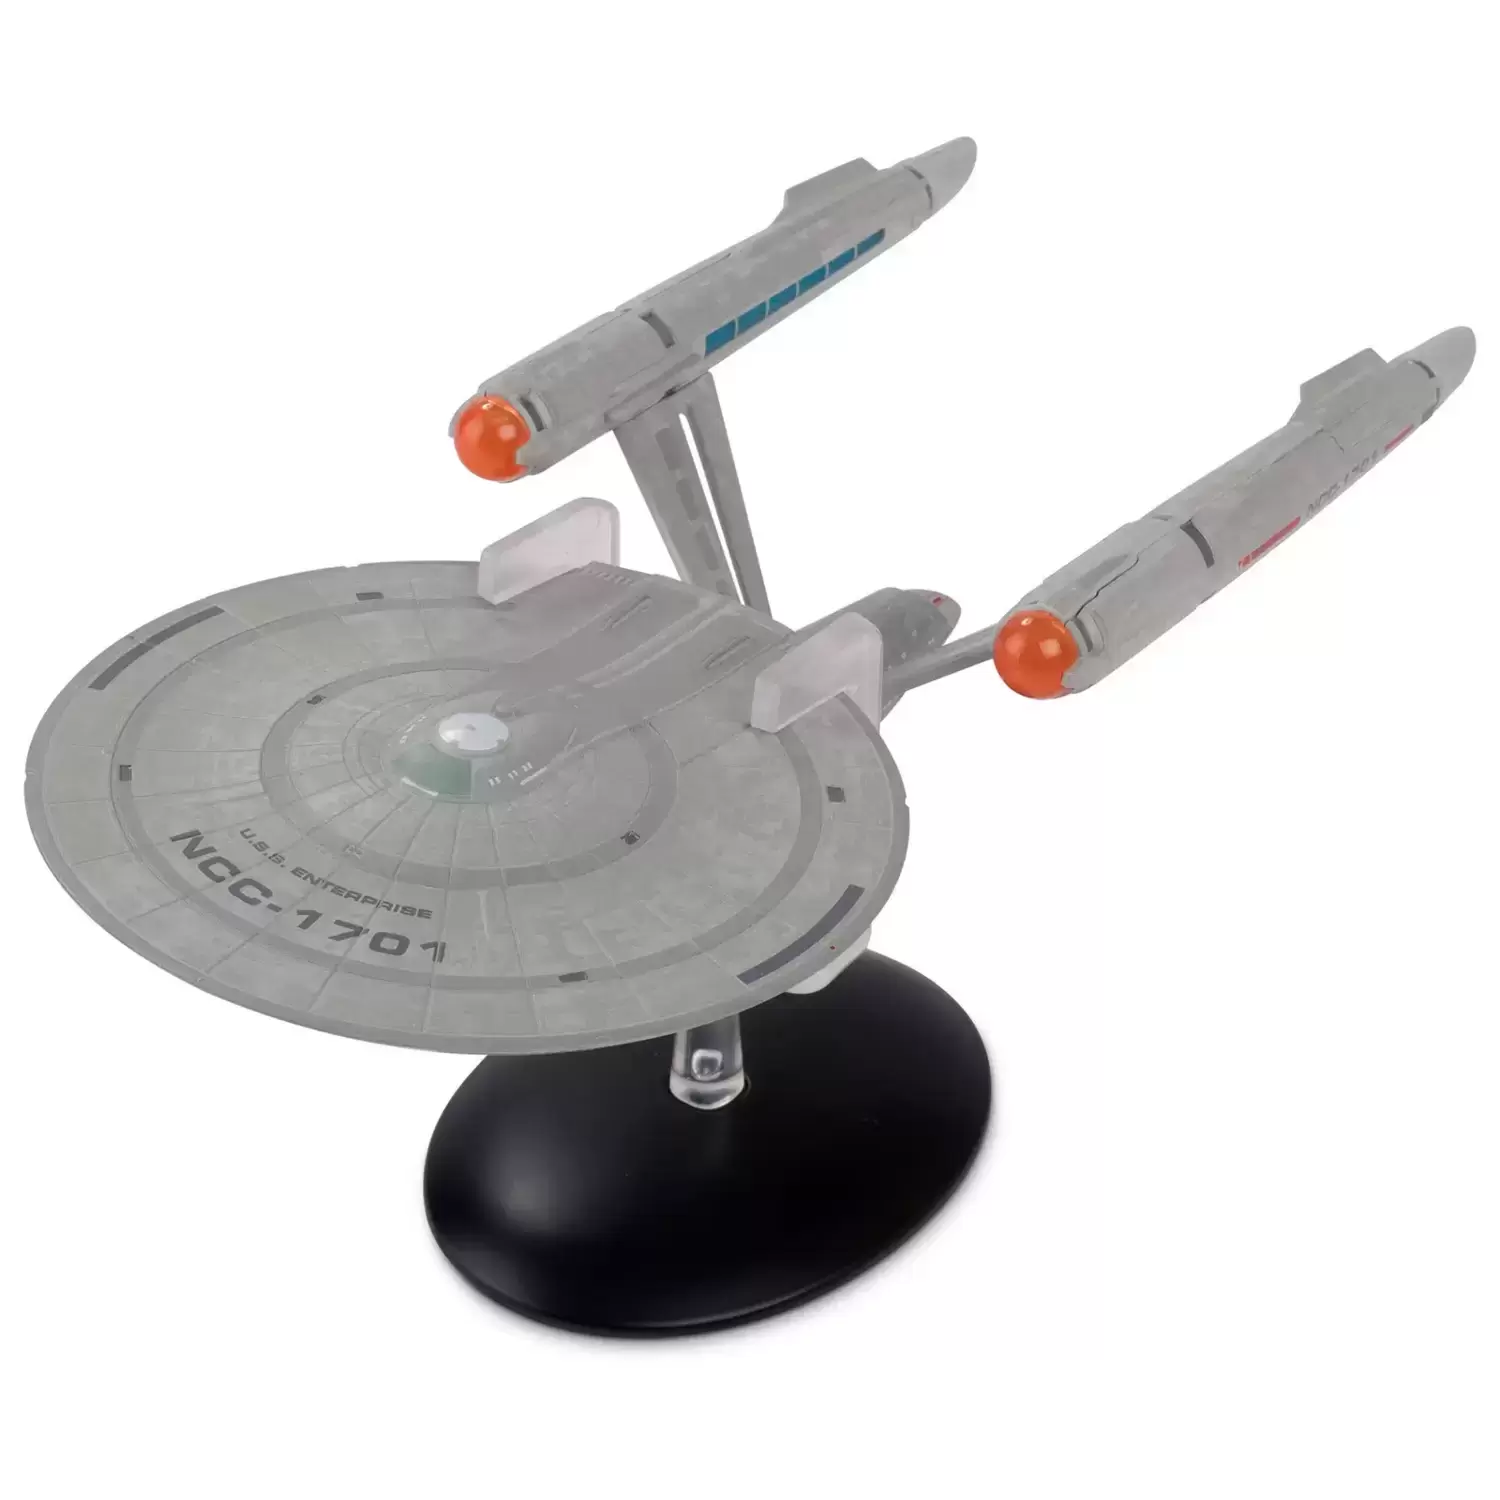 Star Trek Discovery The Official Starships Collection - U.S.S. Enterprise NCC-1701 (Constitution-class)